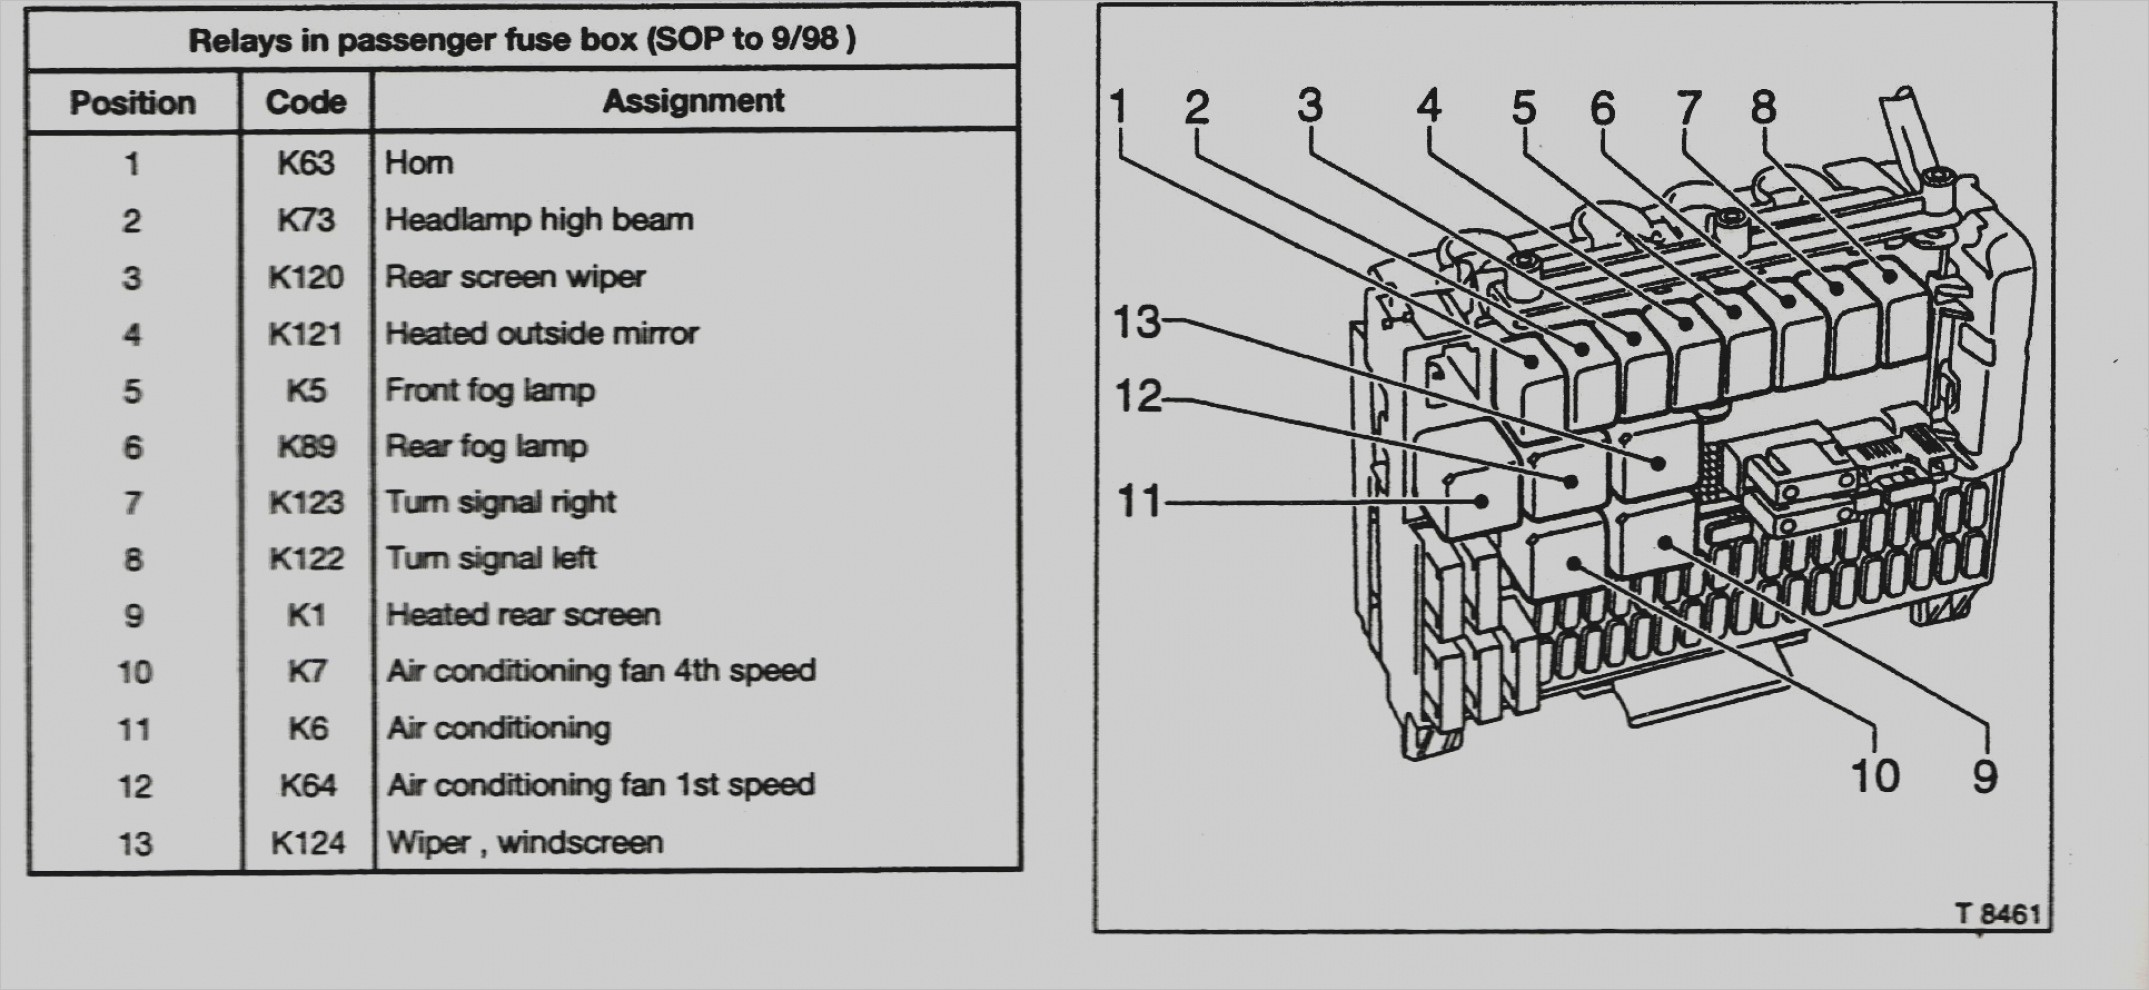 Fuse Box In Vauxhall Vectra - Wiring Diagram